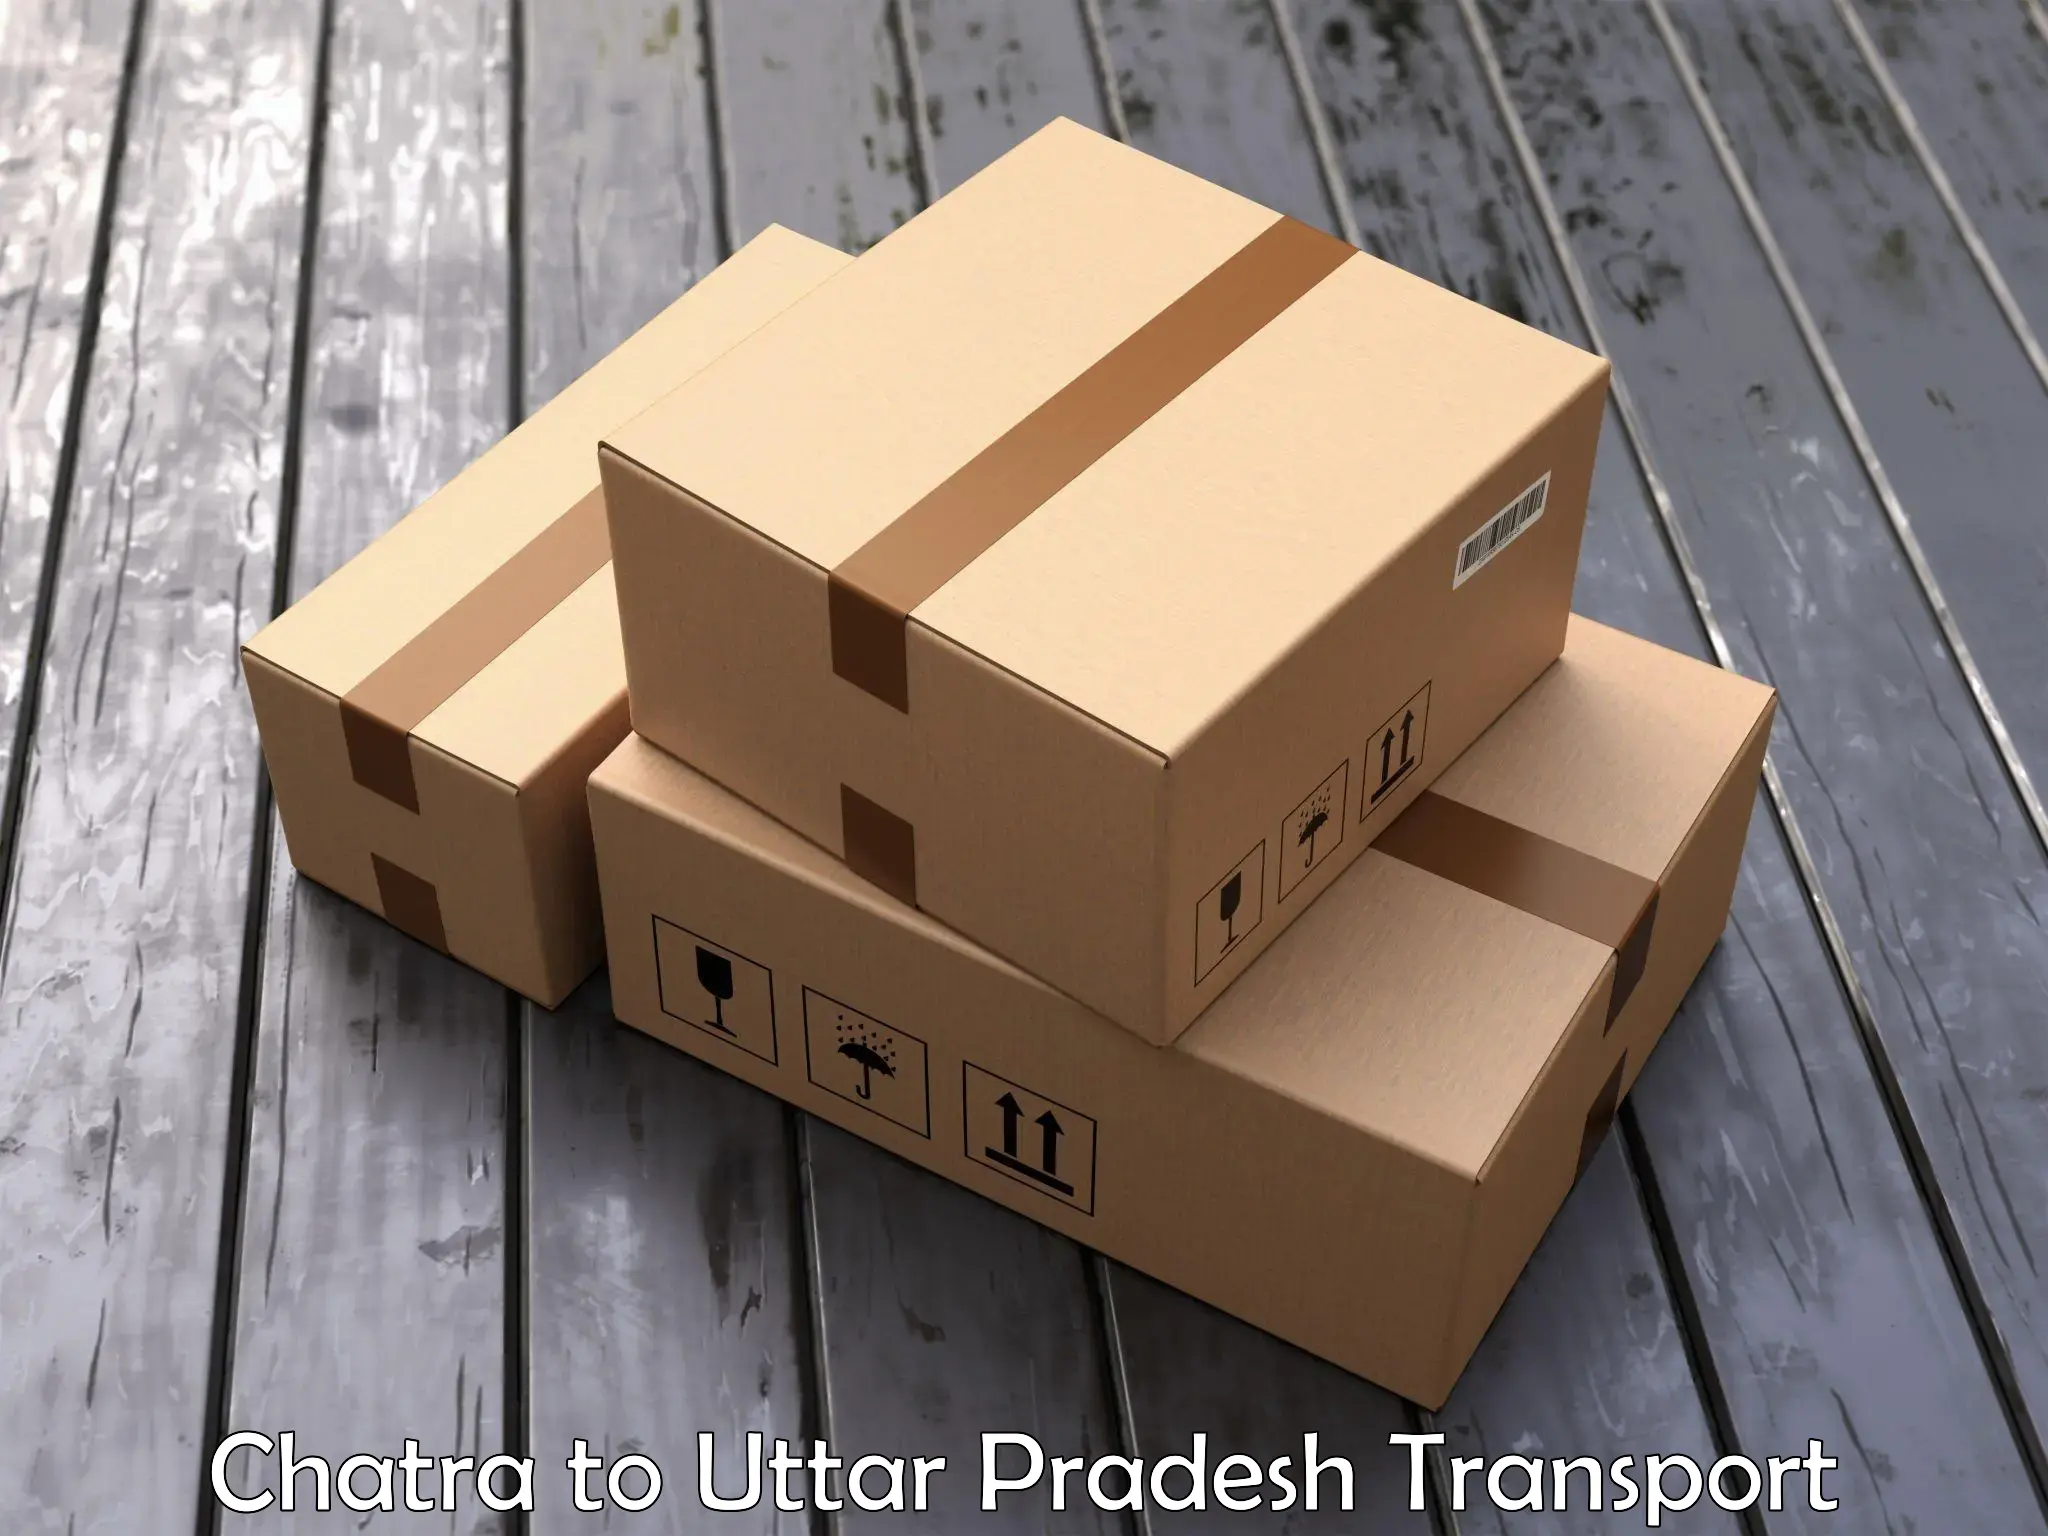 Truck transport companies in India in Chatra to Itava